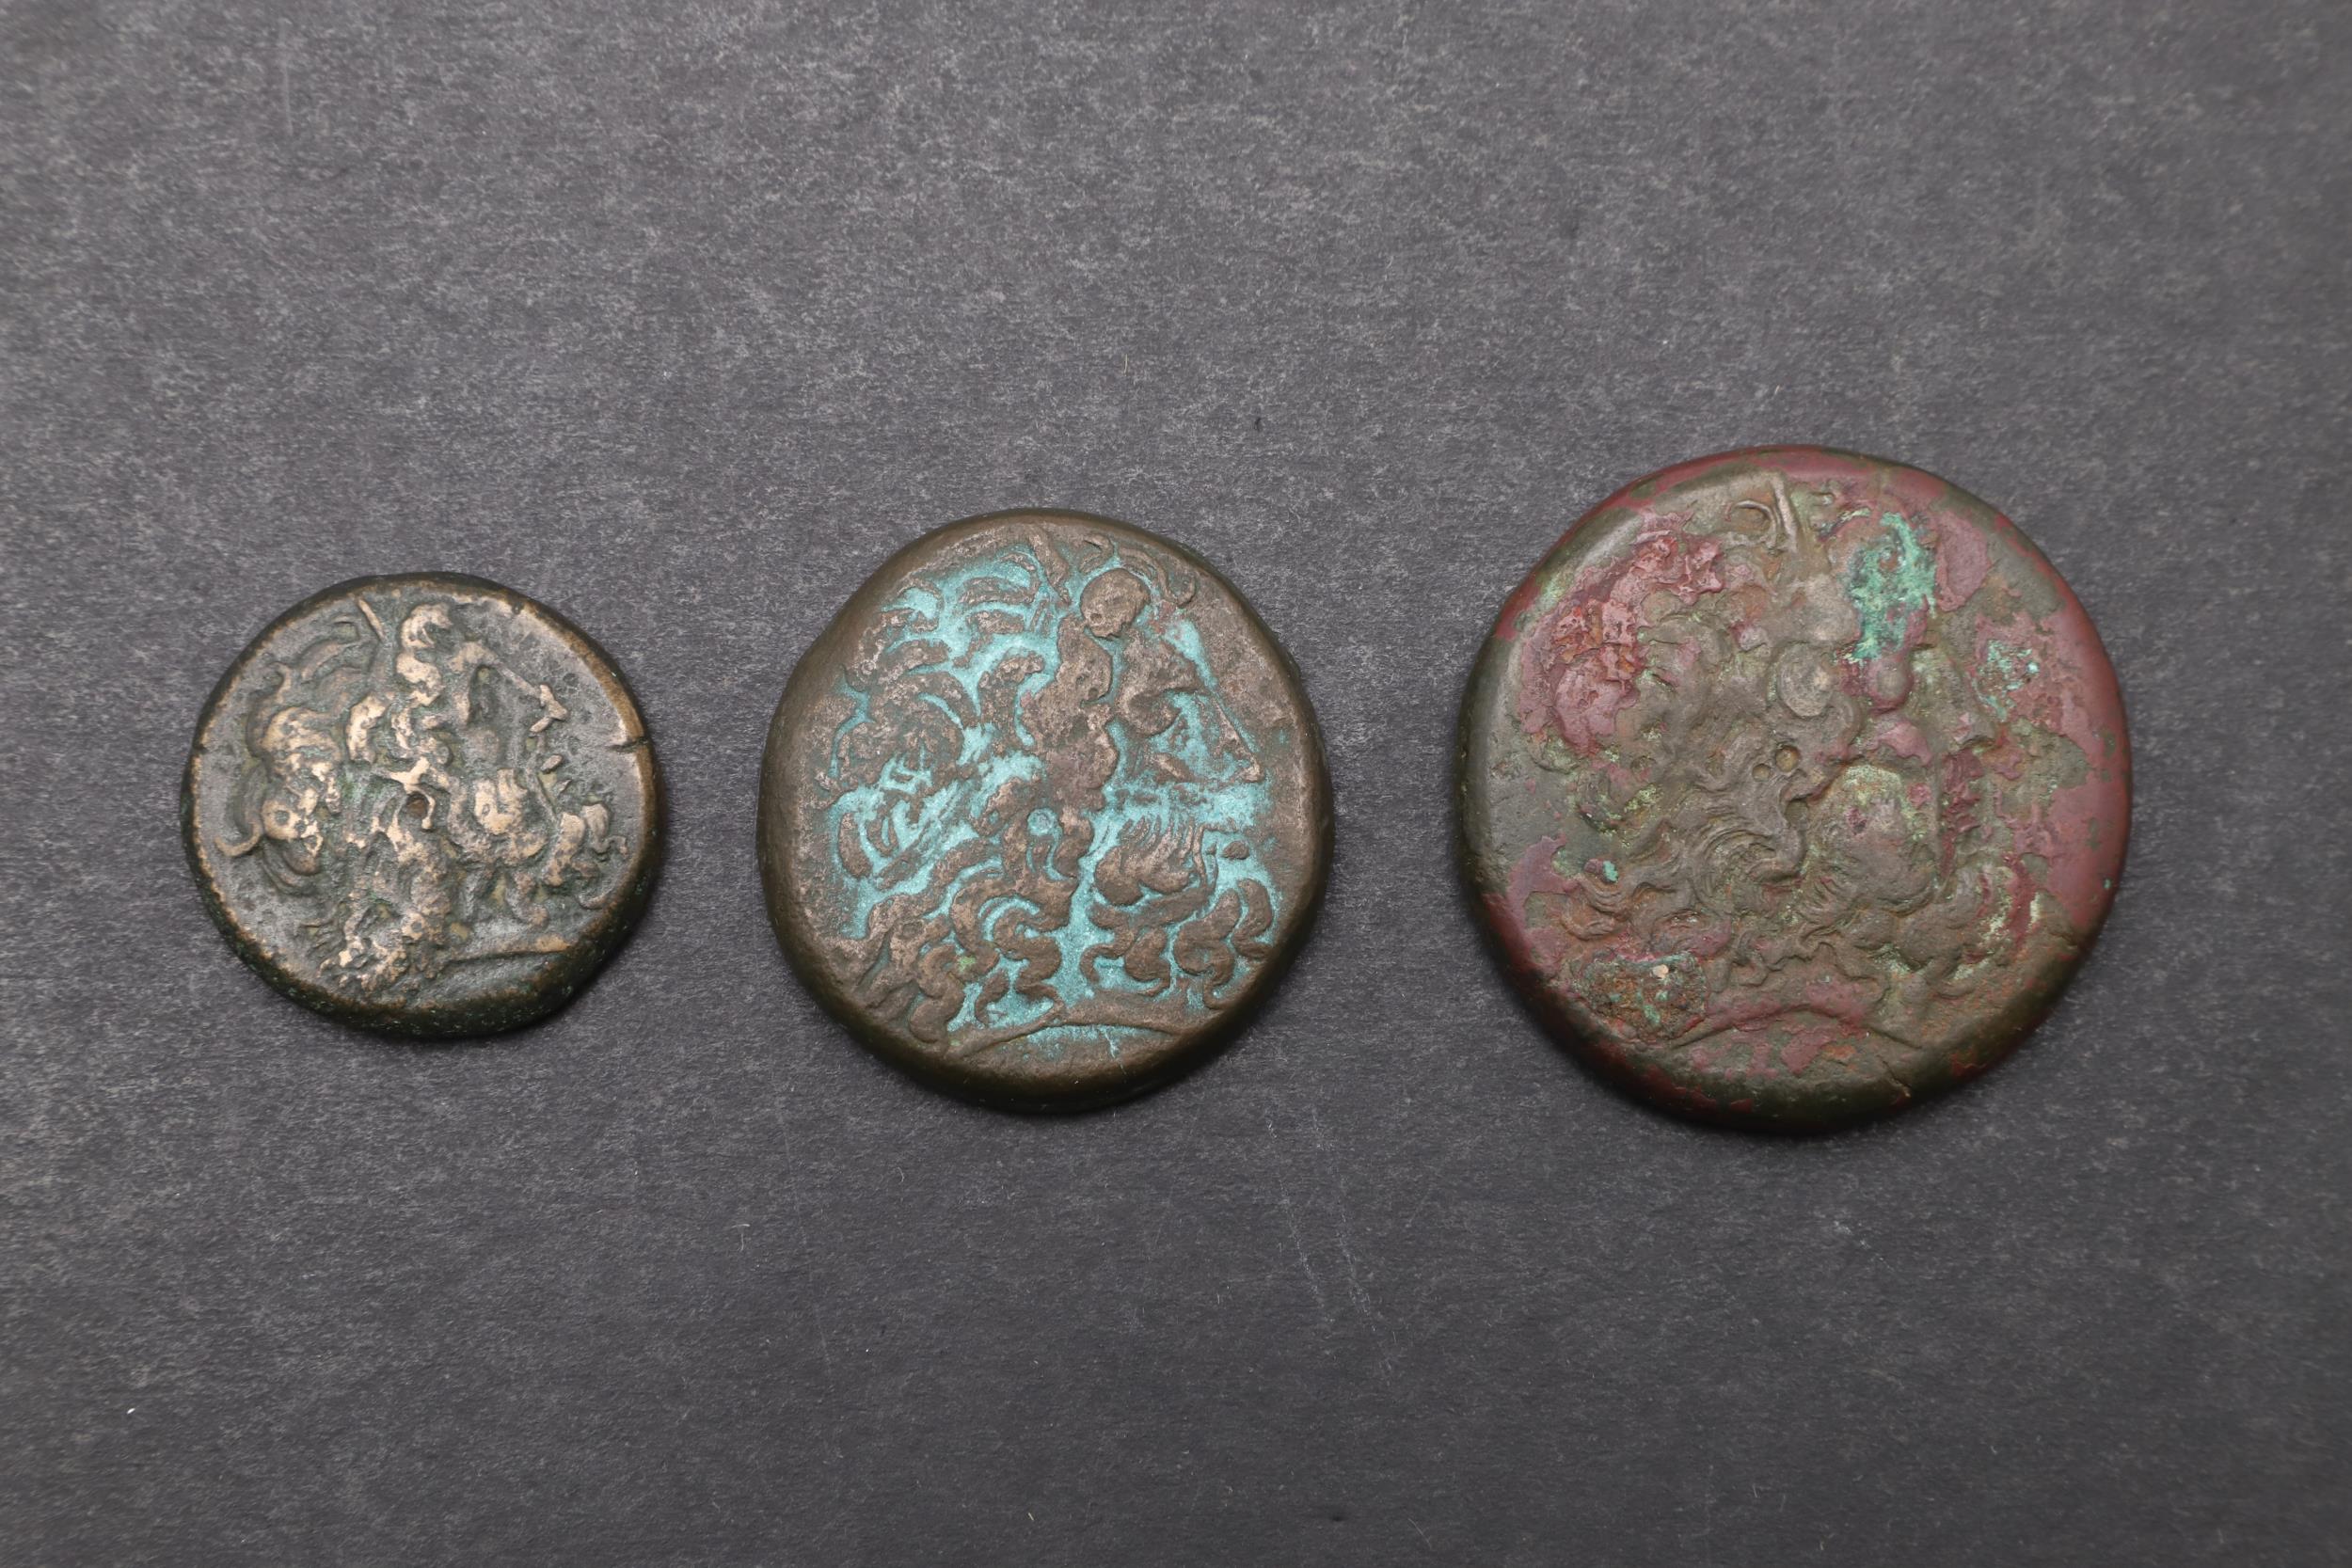 EGYPTIAN COINS OF PTOLEMY III (246-221 B.C.) - Image 2 of 4